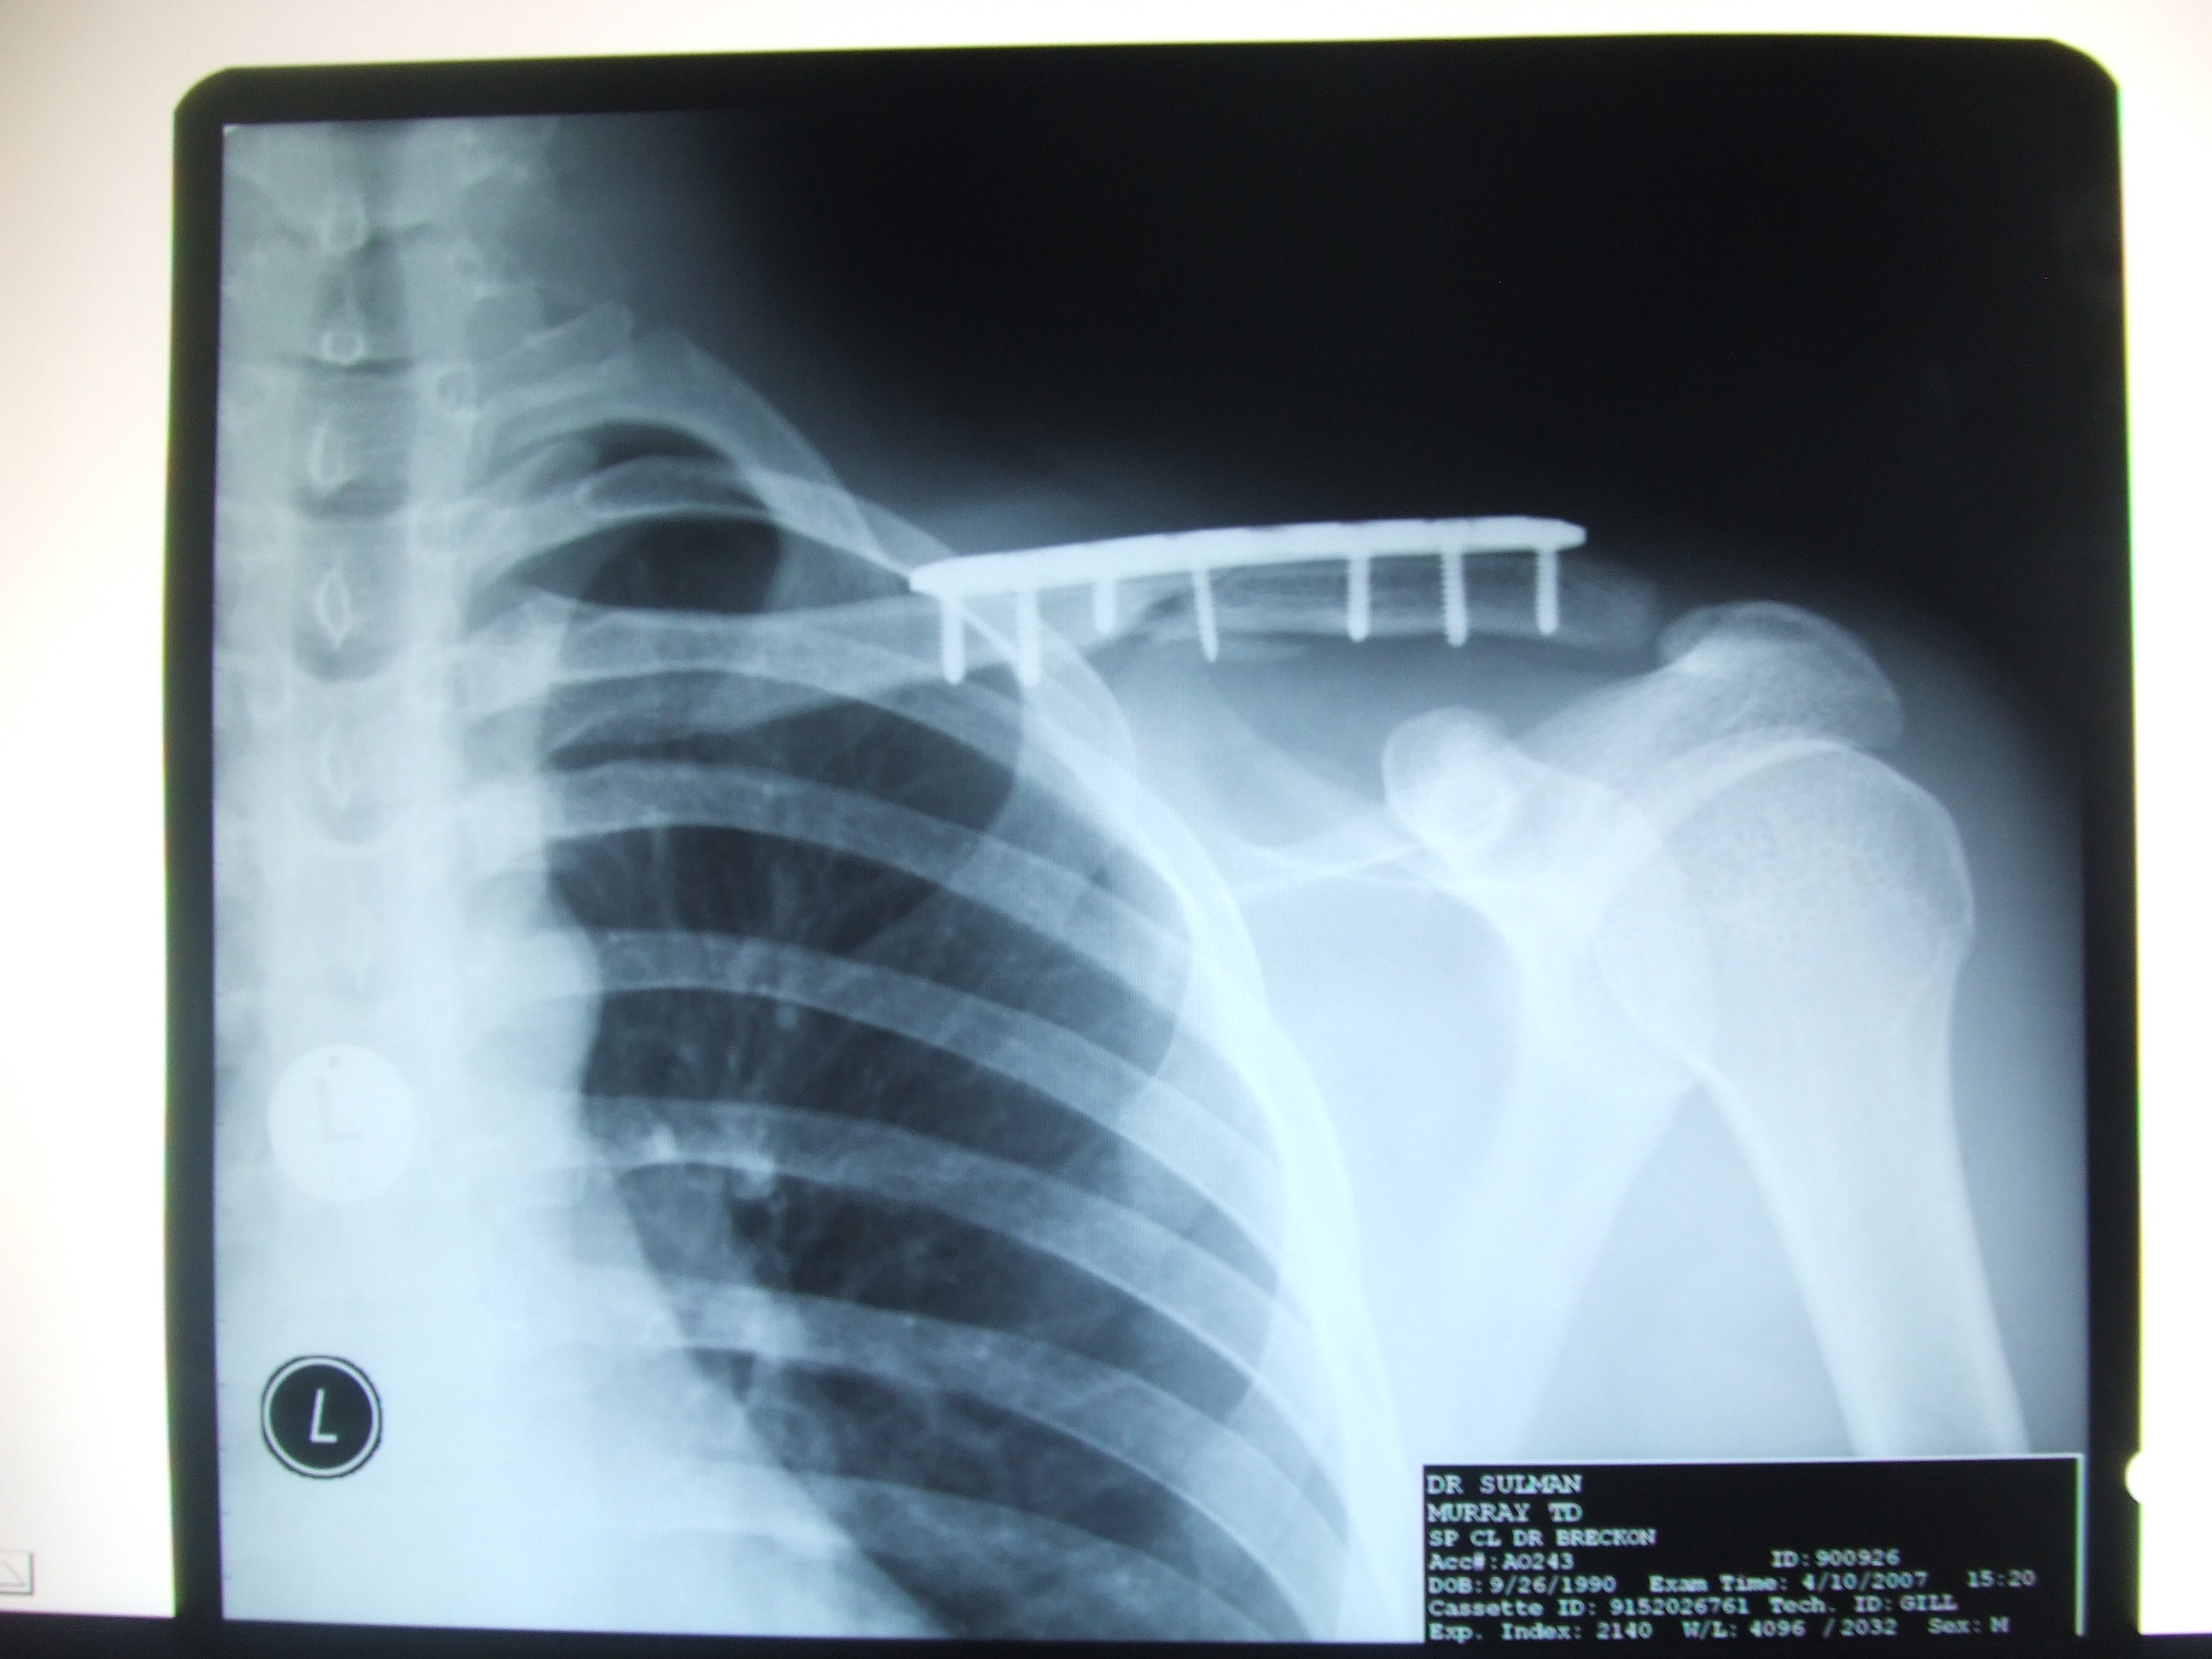 File:Eight hole clavicle.JPG